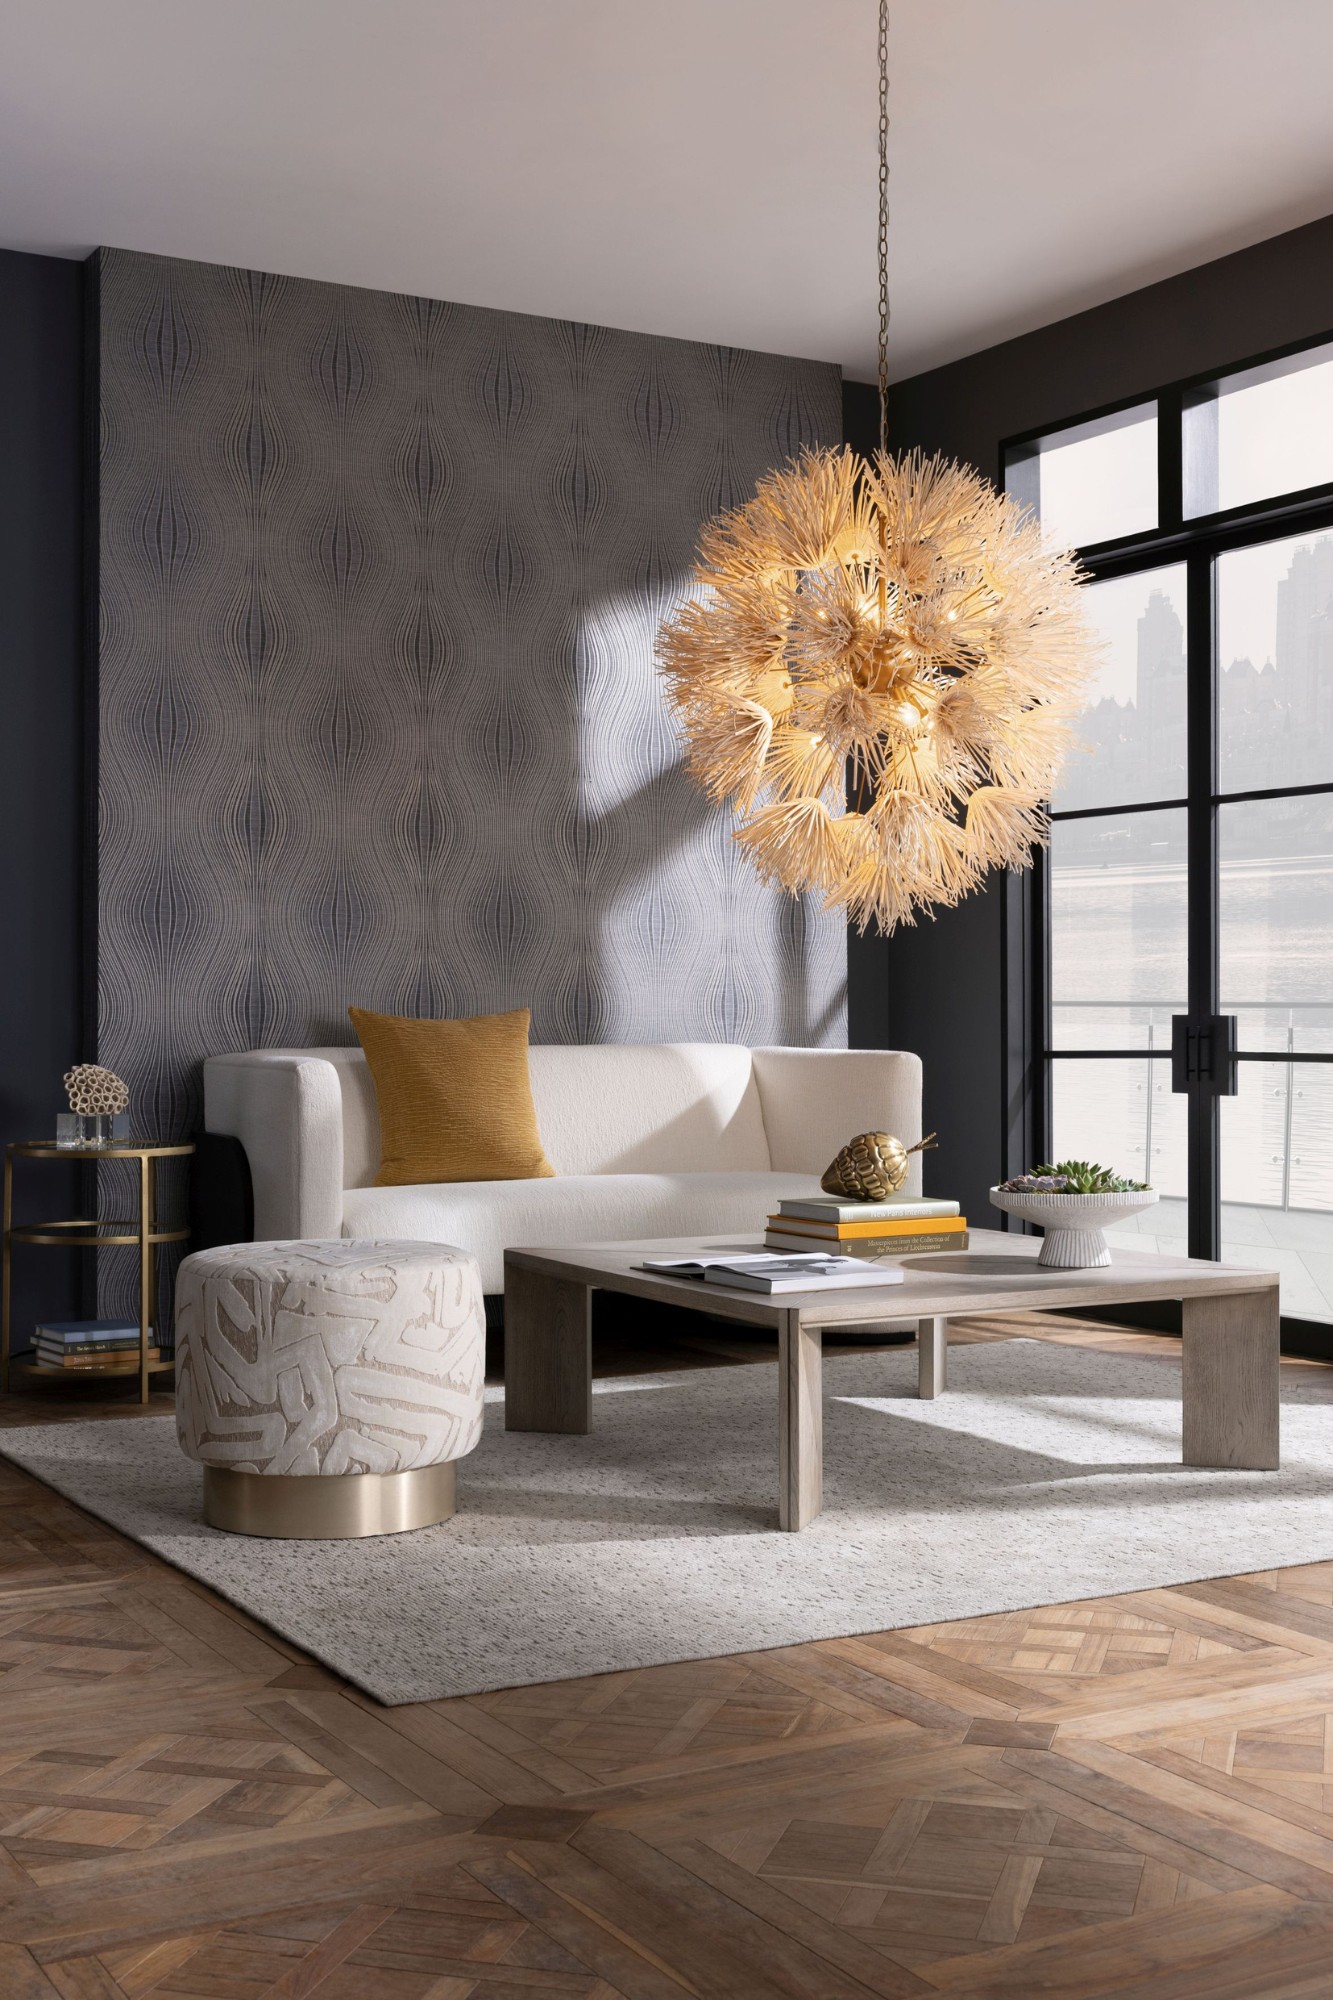 arteriors, Arteriors Introduces Latest Collection, and Four Clear Design Trends